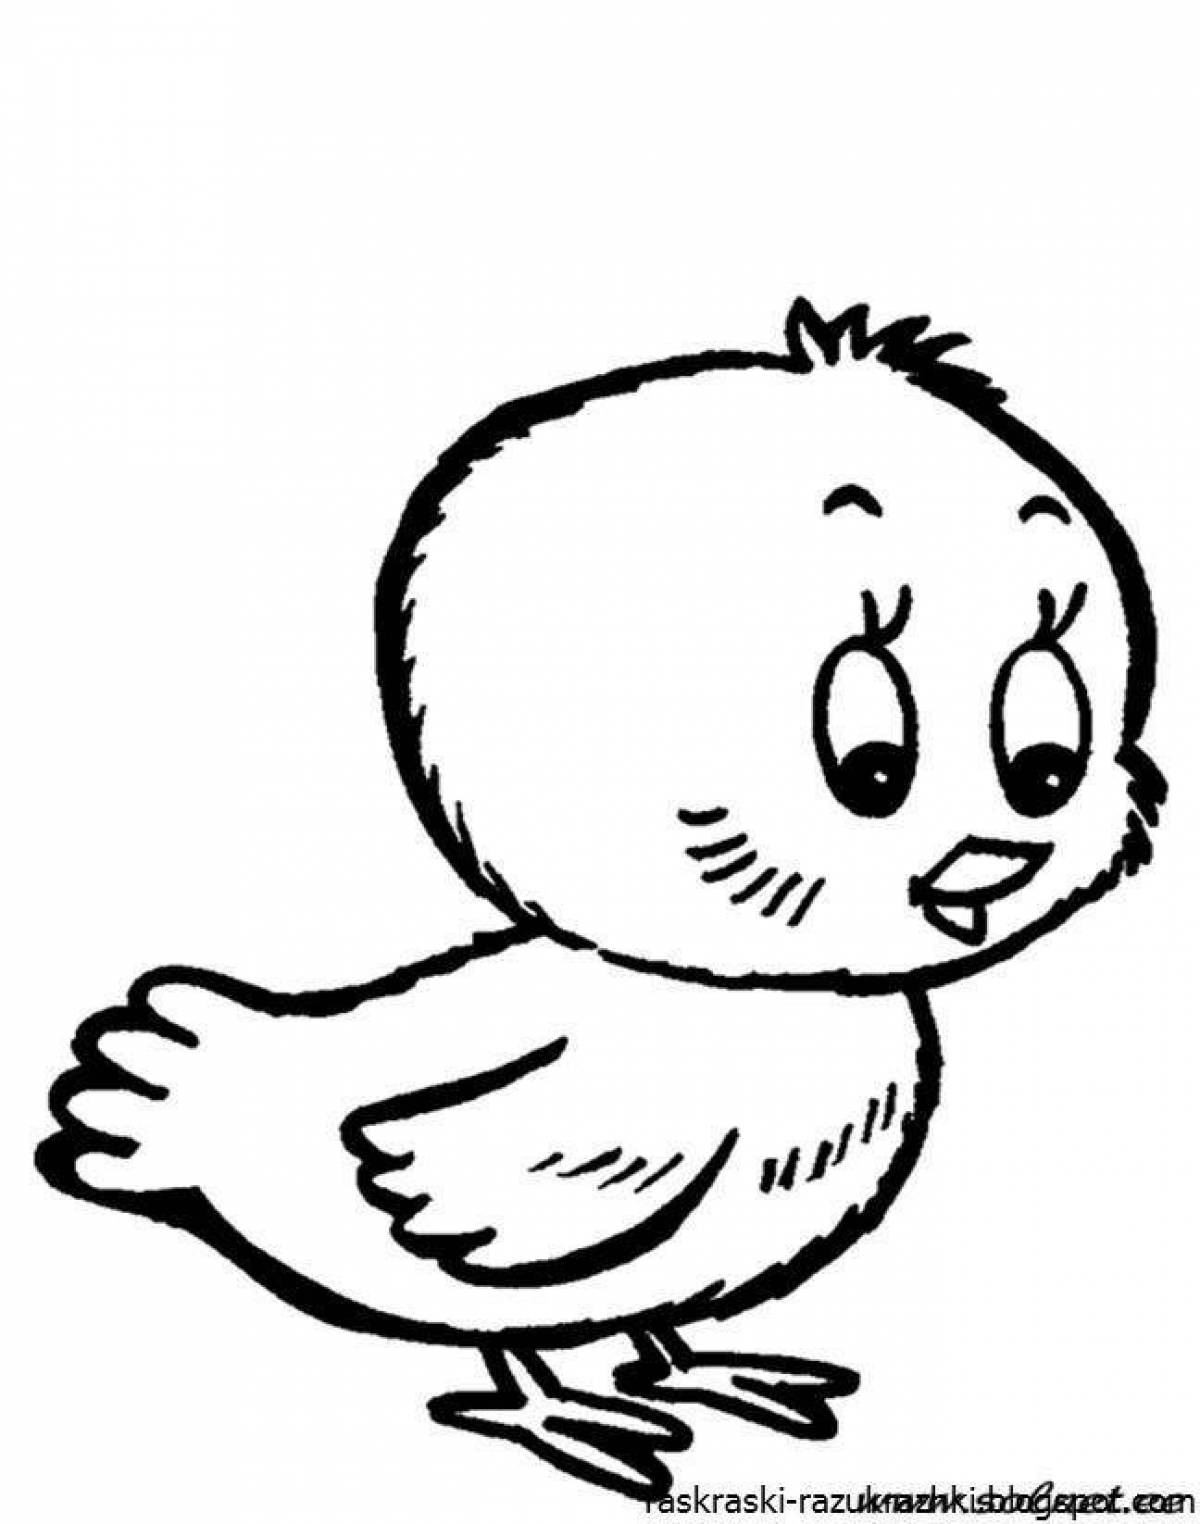 Adorable chick coloring page for 3-4 year olds